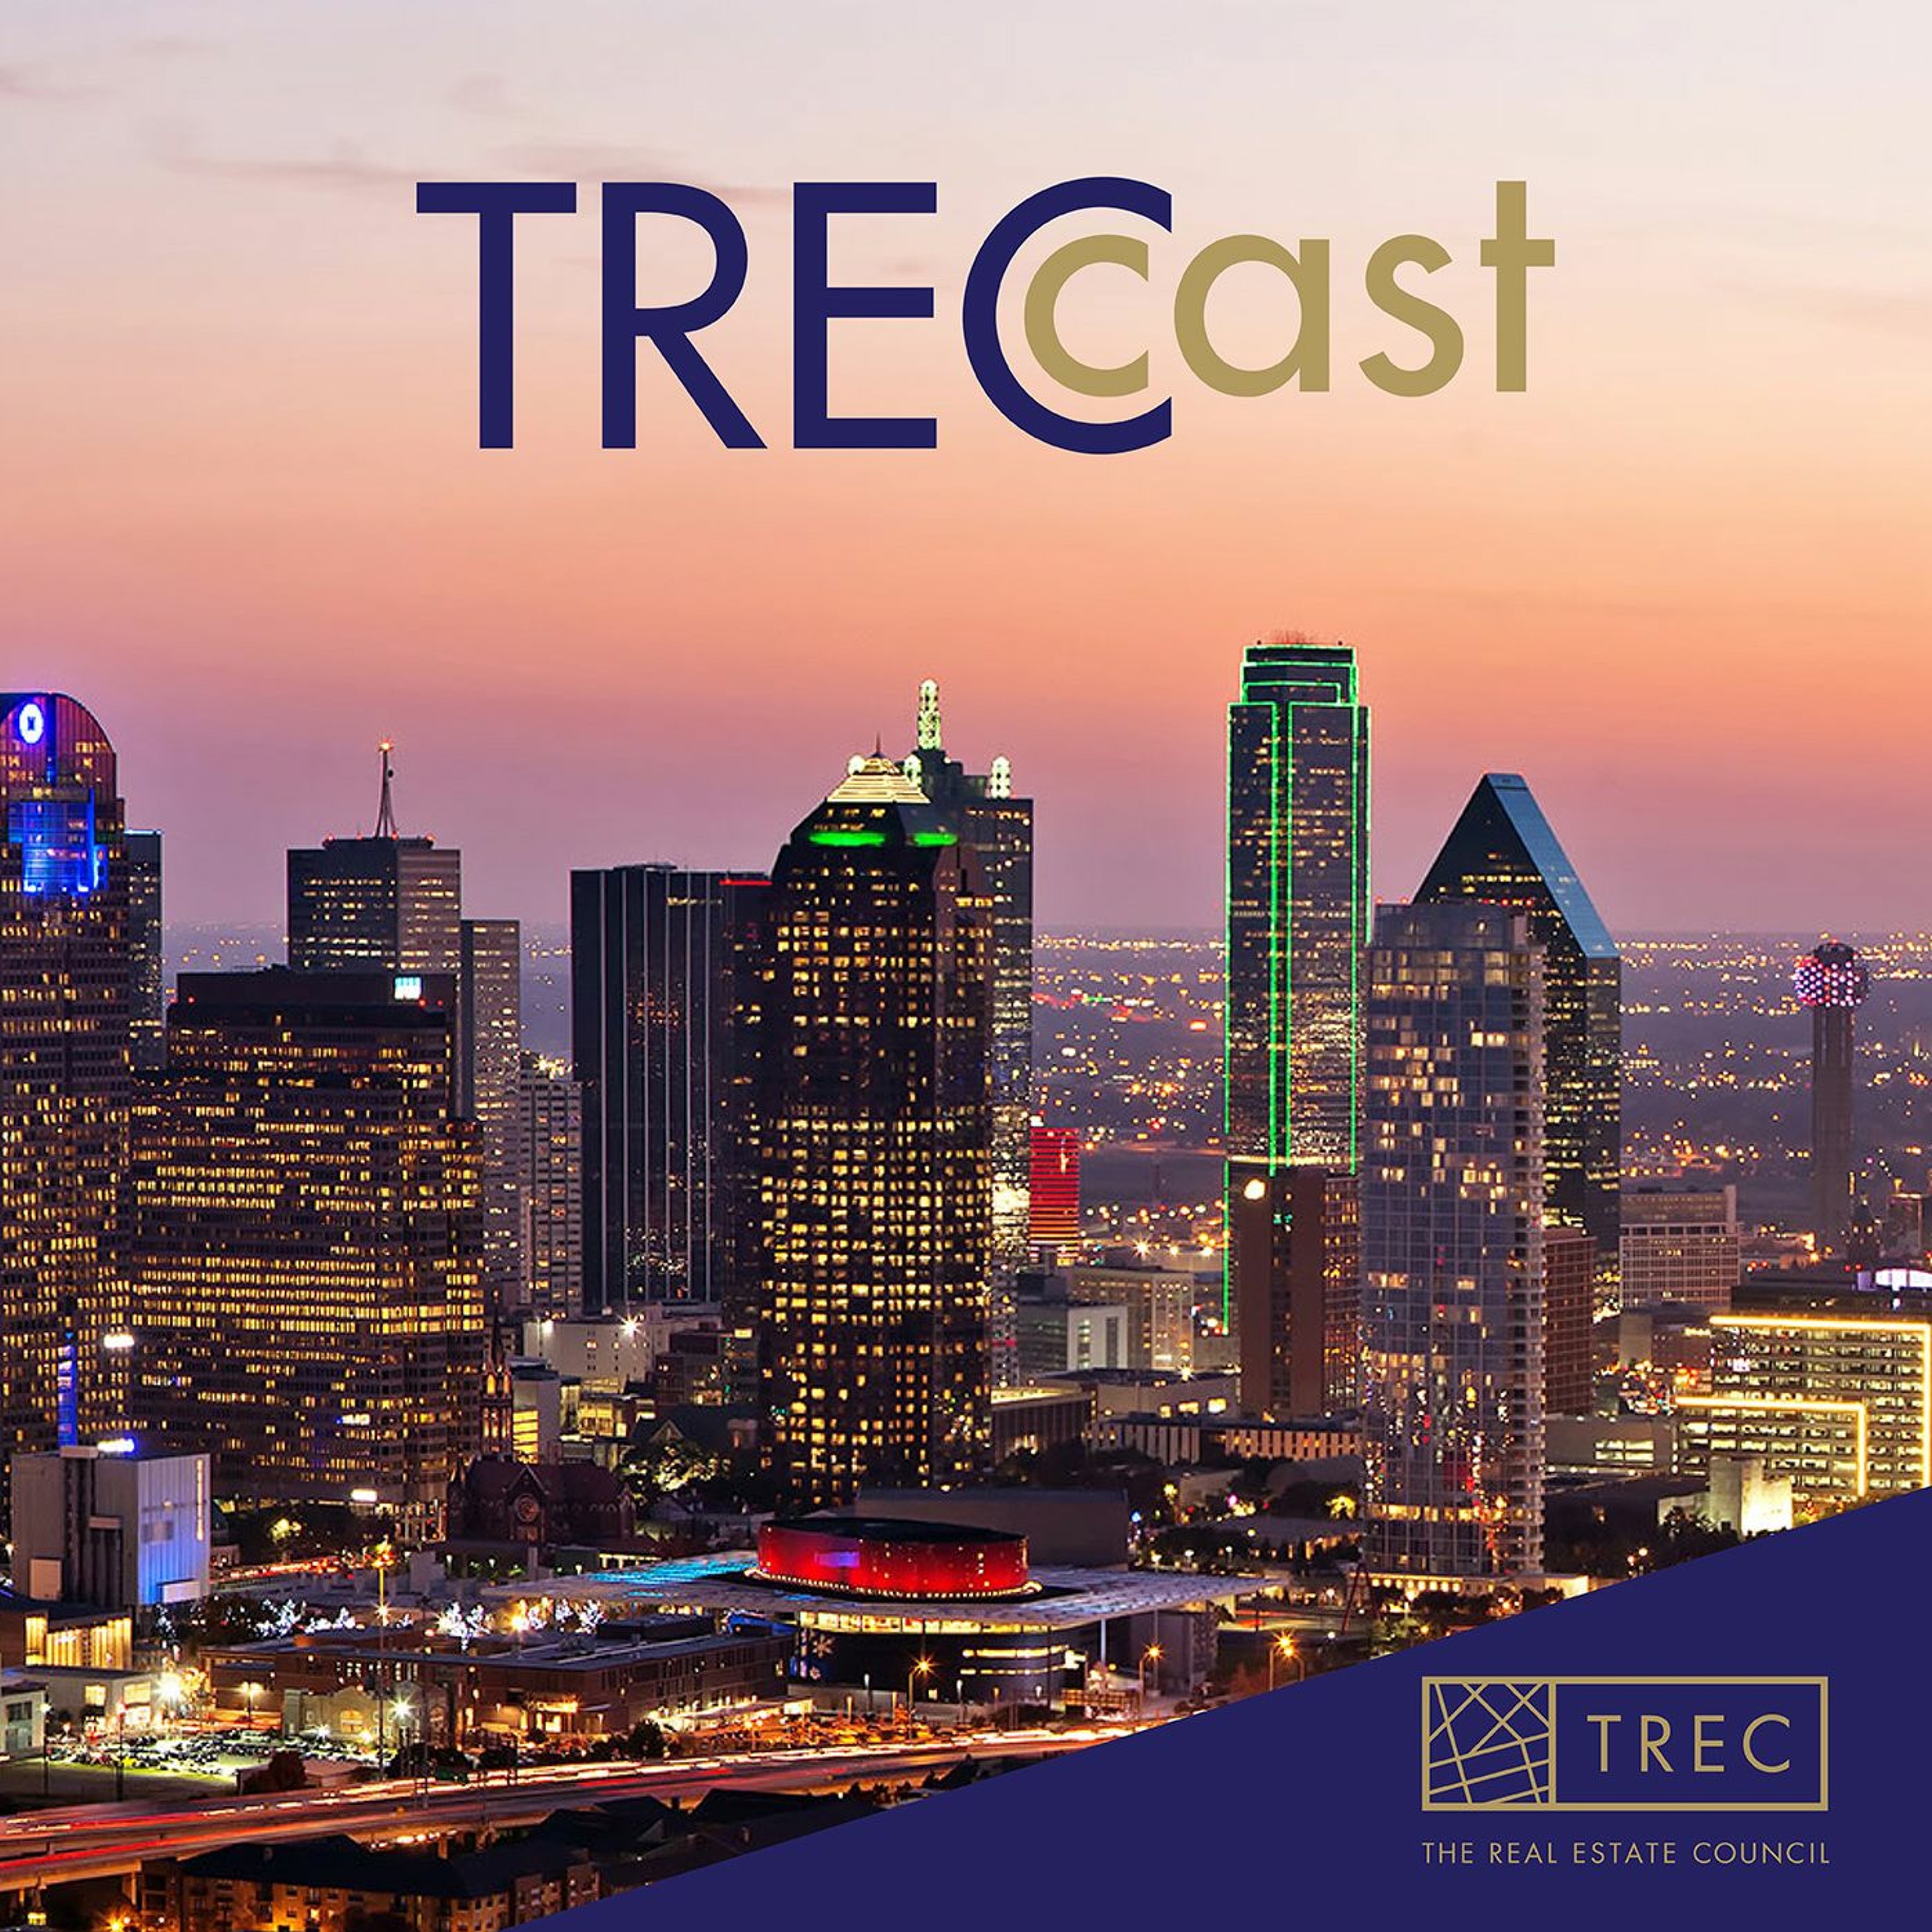 A Fireside Chat About Our (Mostly Positive) Future | CRE Executive Roundtable | TRECcast